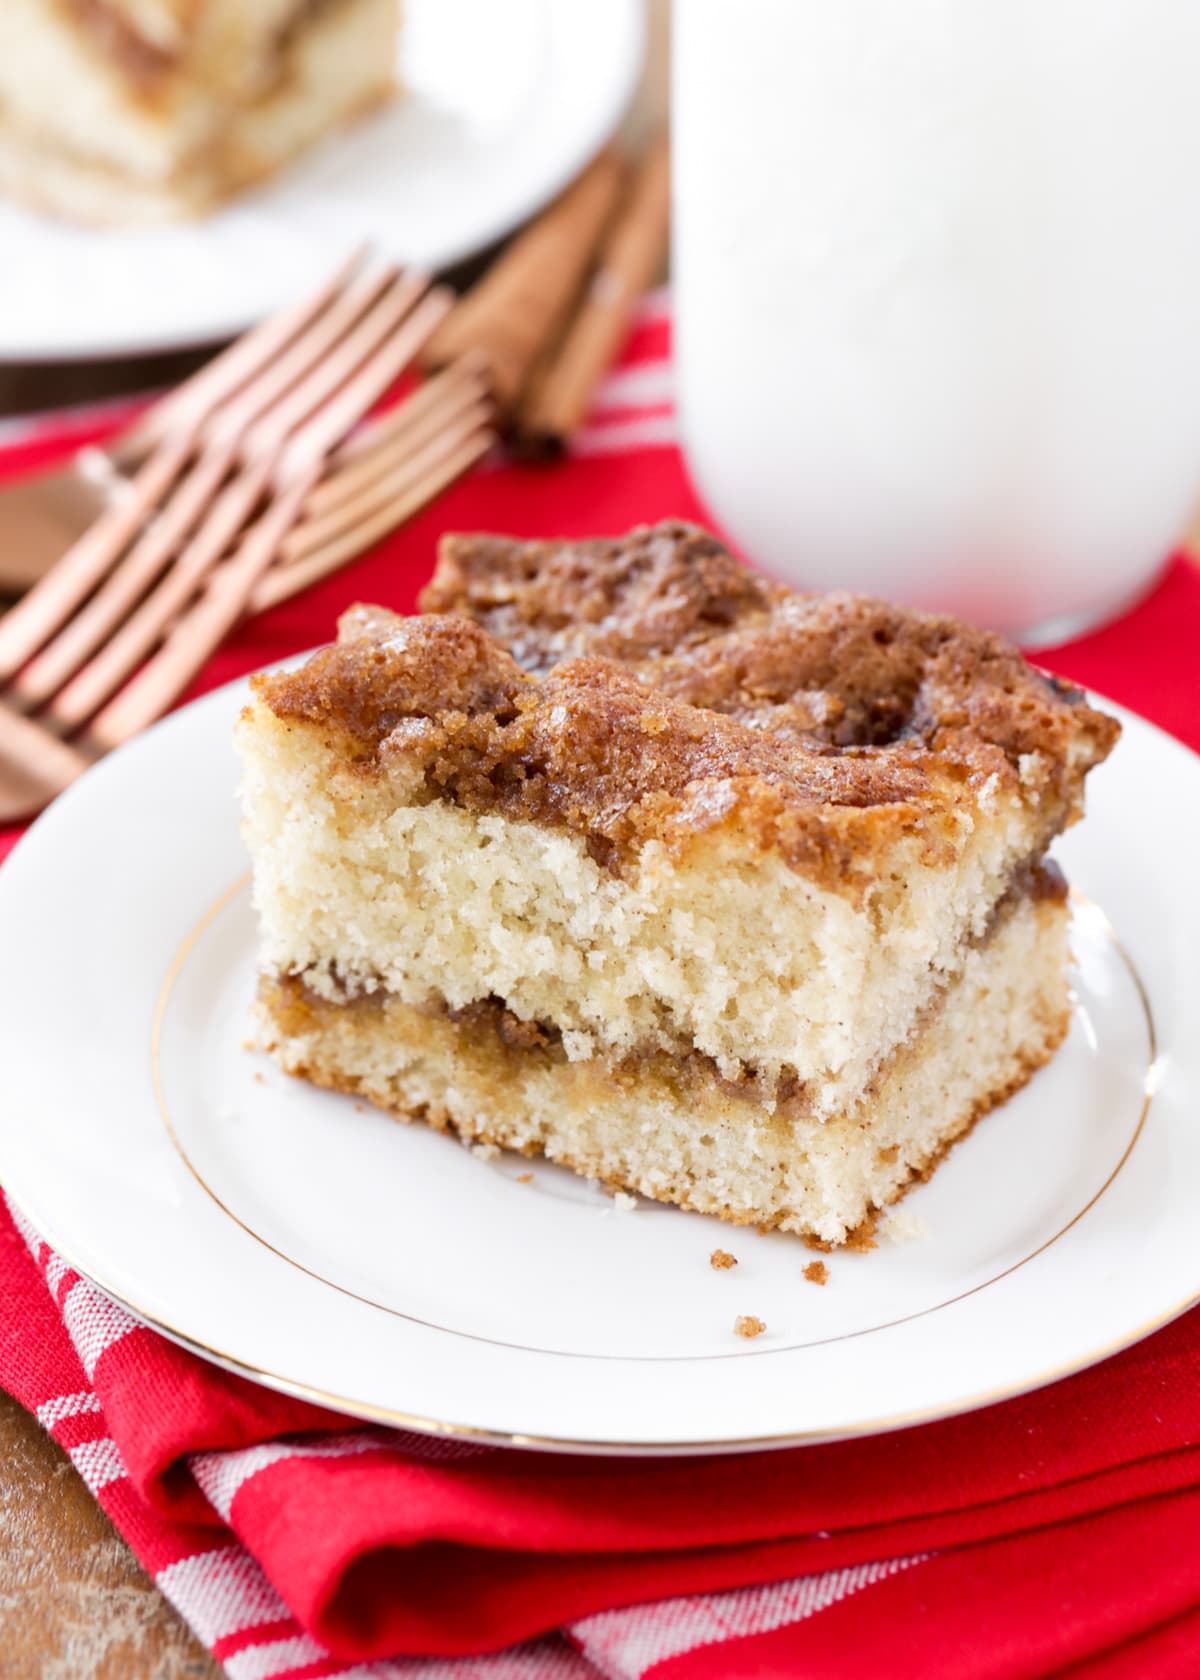 Coffee cake recipe slice on white plate with red dish towel.